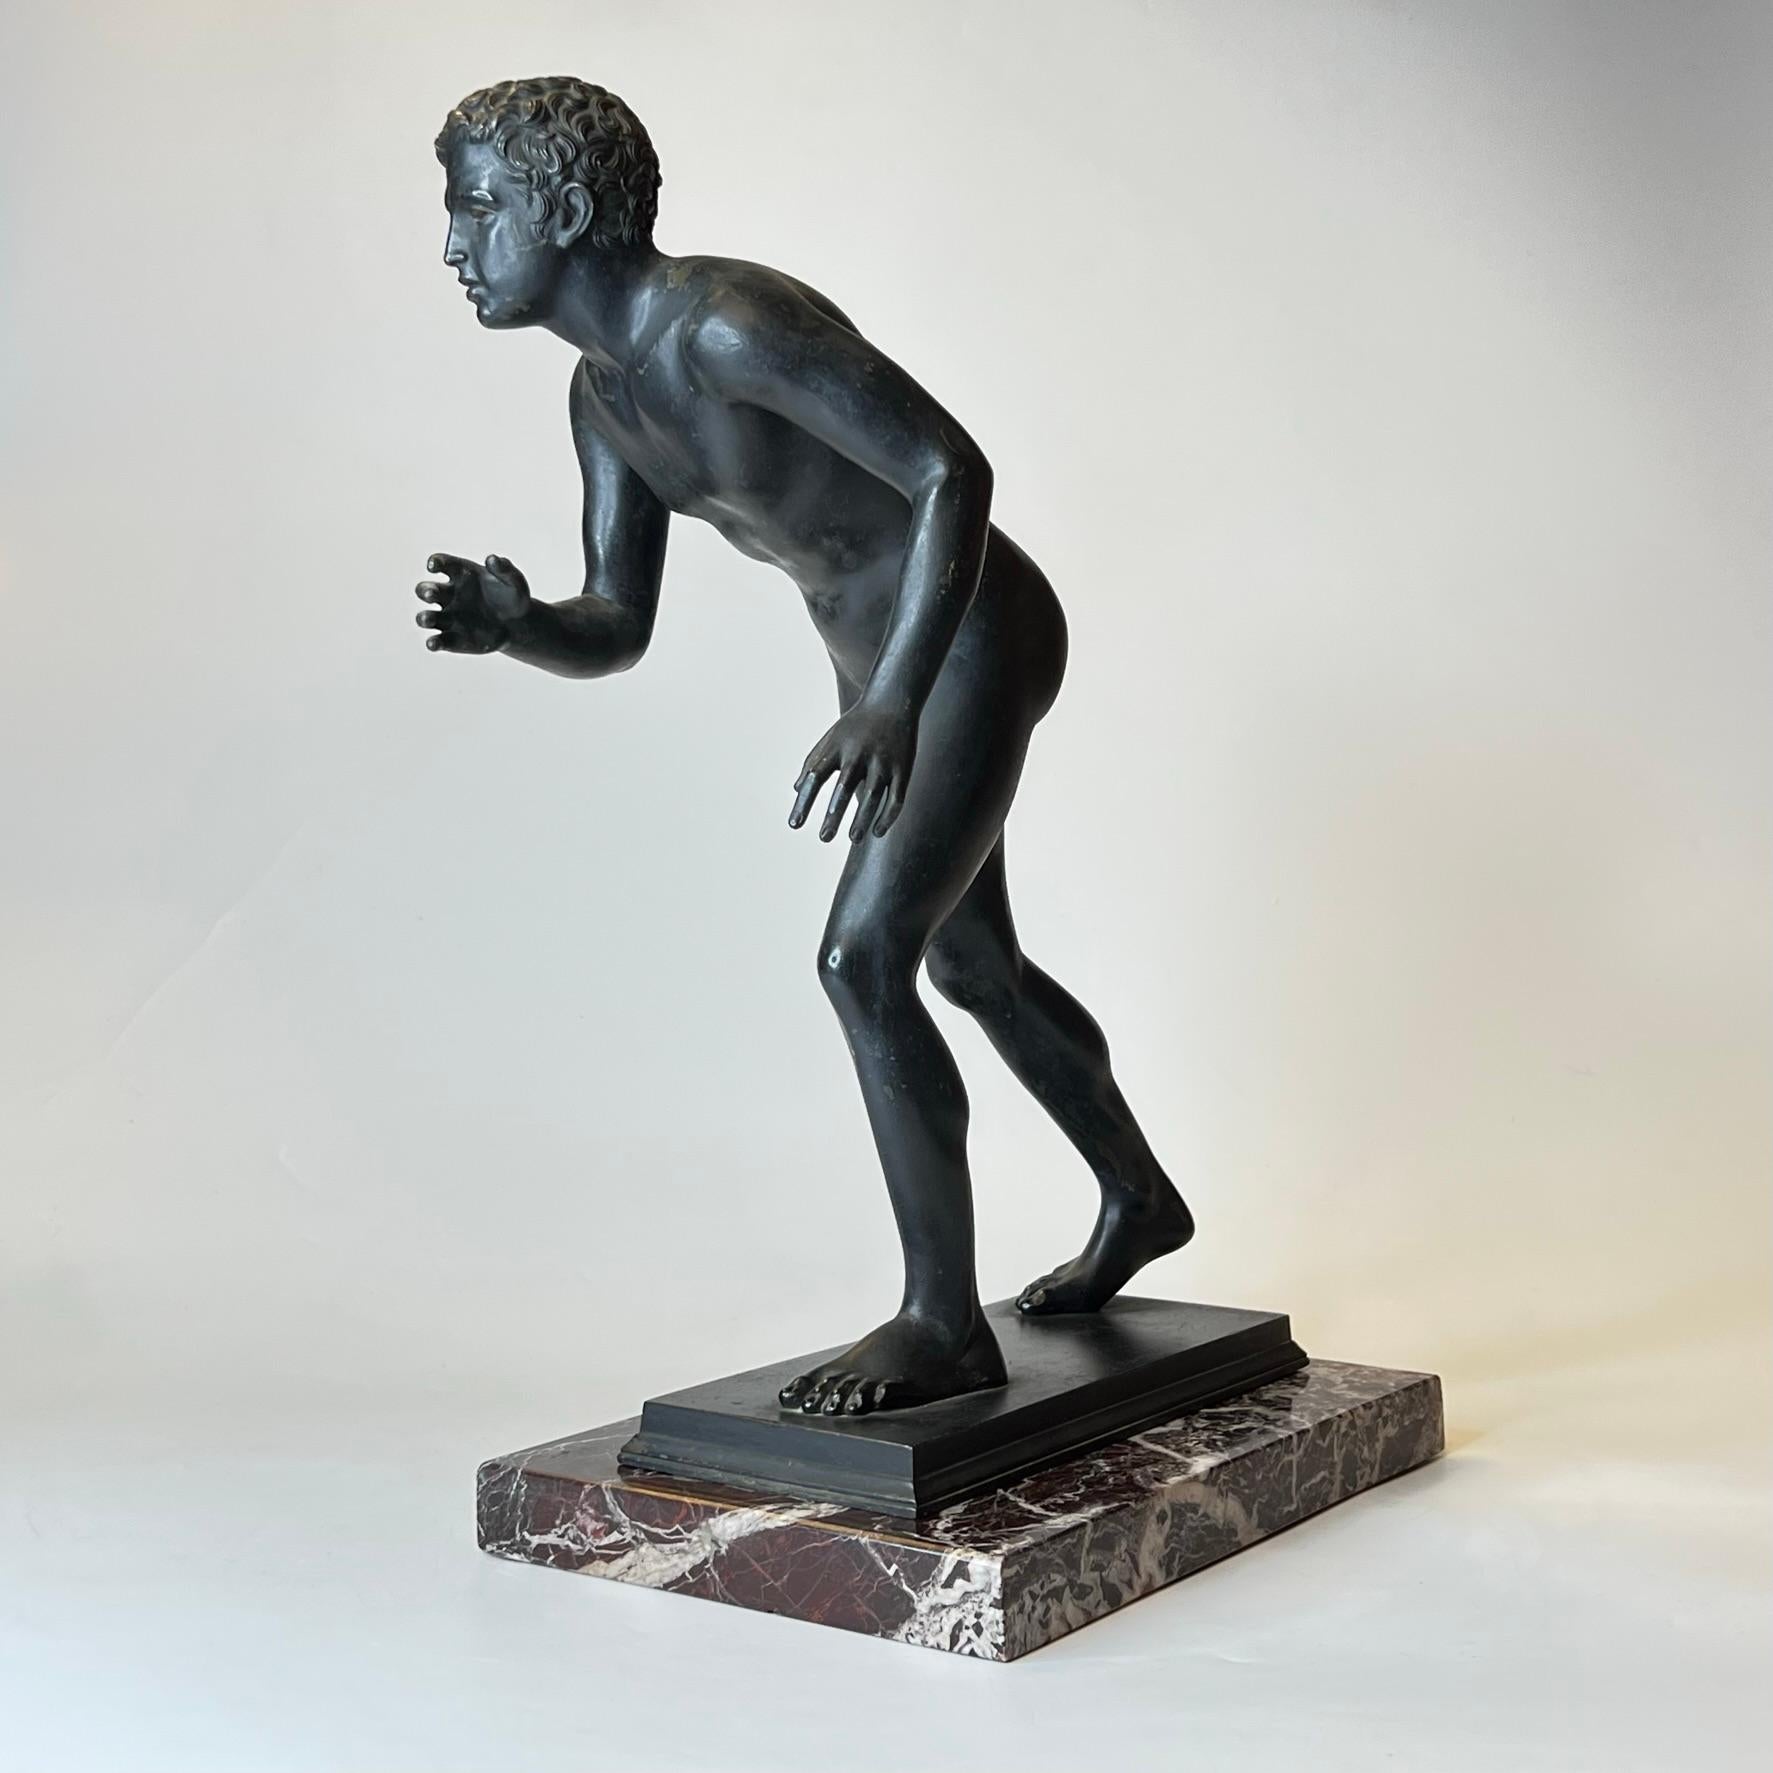 Grand Tour bronze on marble pedestal depicting the bronze runner from the Villa of the Papyri (Herculaneum), in Ercolano, Italy.  Cast by Sabatino deAngelis of Naples in 1906.  In good condition.  Bronze measures 17.5 by 13 by 6.5 inches.  Separate